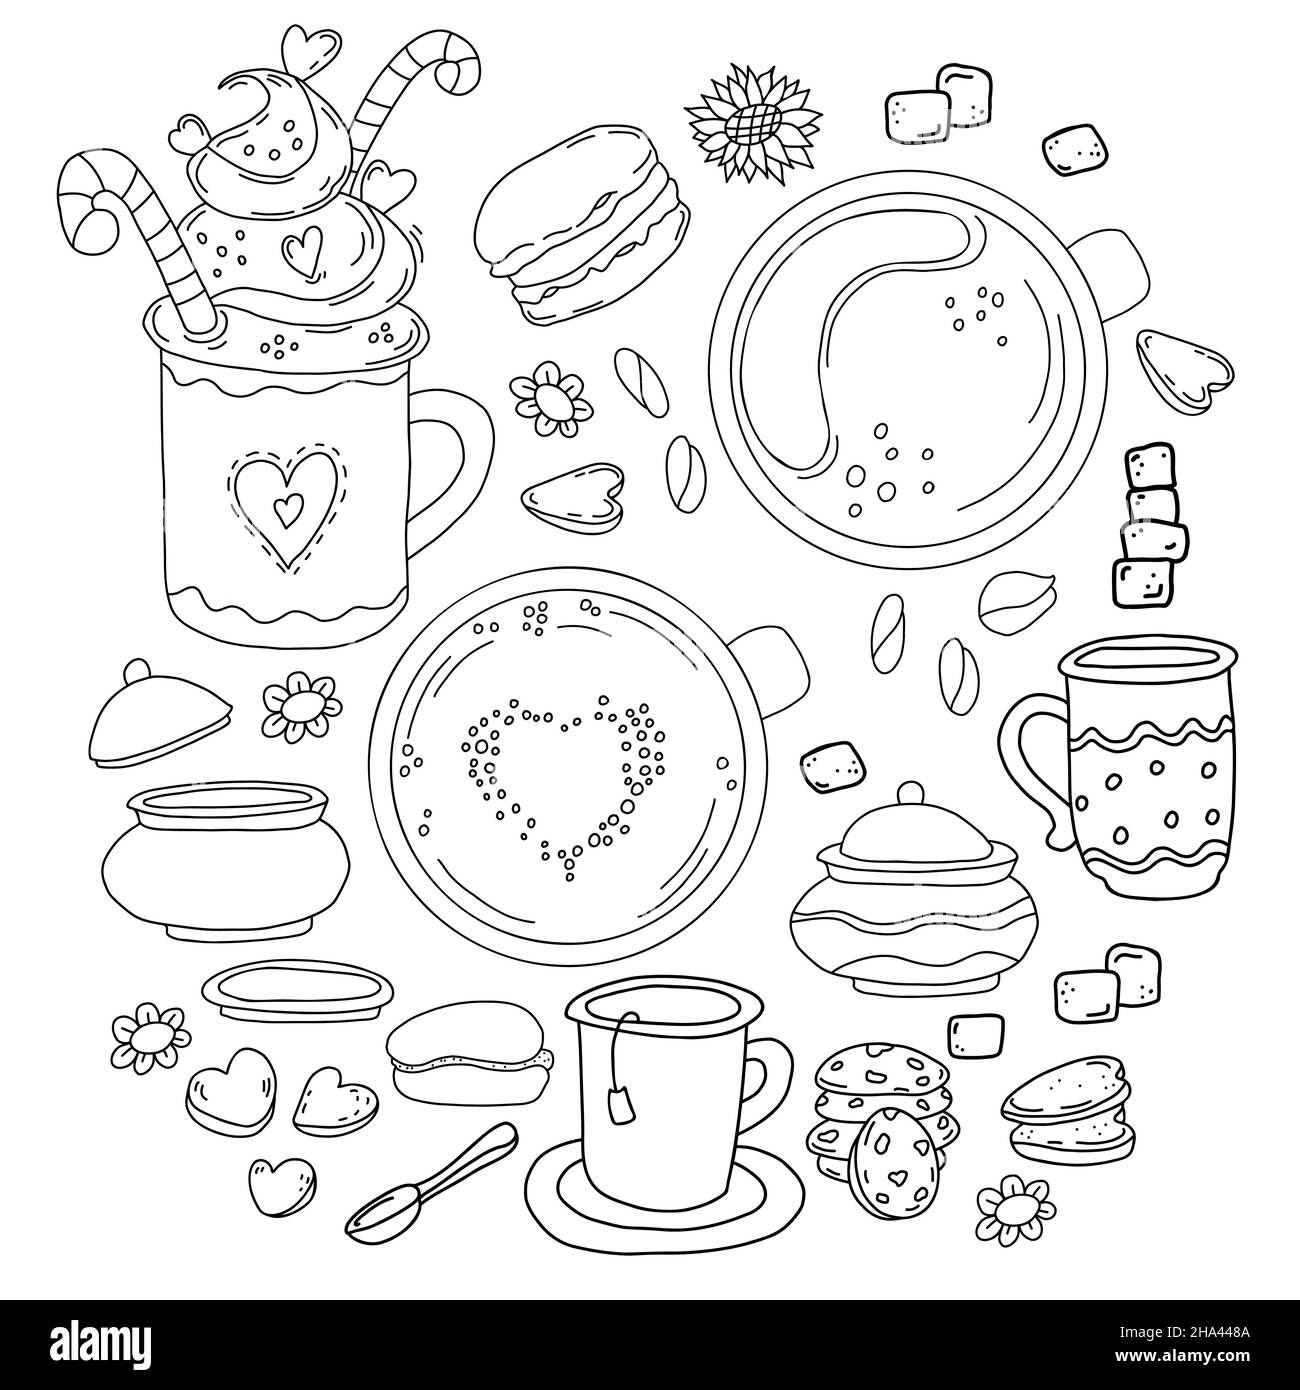 large set of desserts and dishes in style of hand-drawn linear doodles. Cup of tea and cream dessert, coffee, spoon and sugar bowl, biscuits, Macaroon Stock Vector